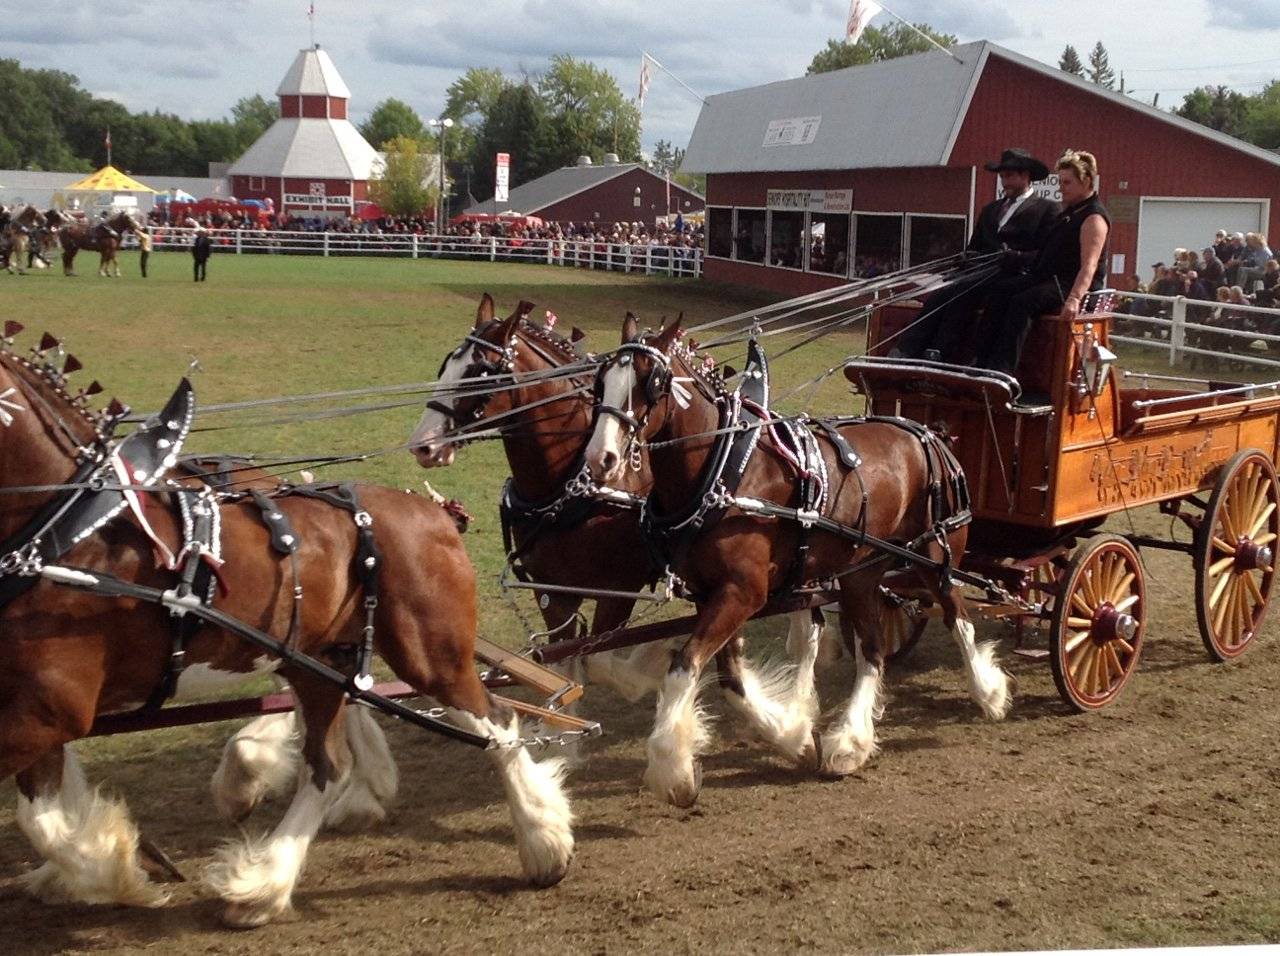 IMG_6354 Clydesdale wagon.JPG